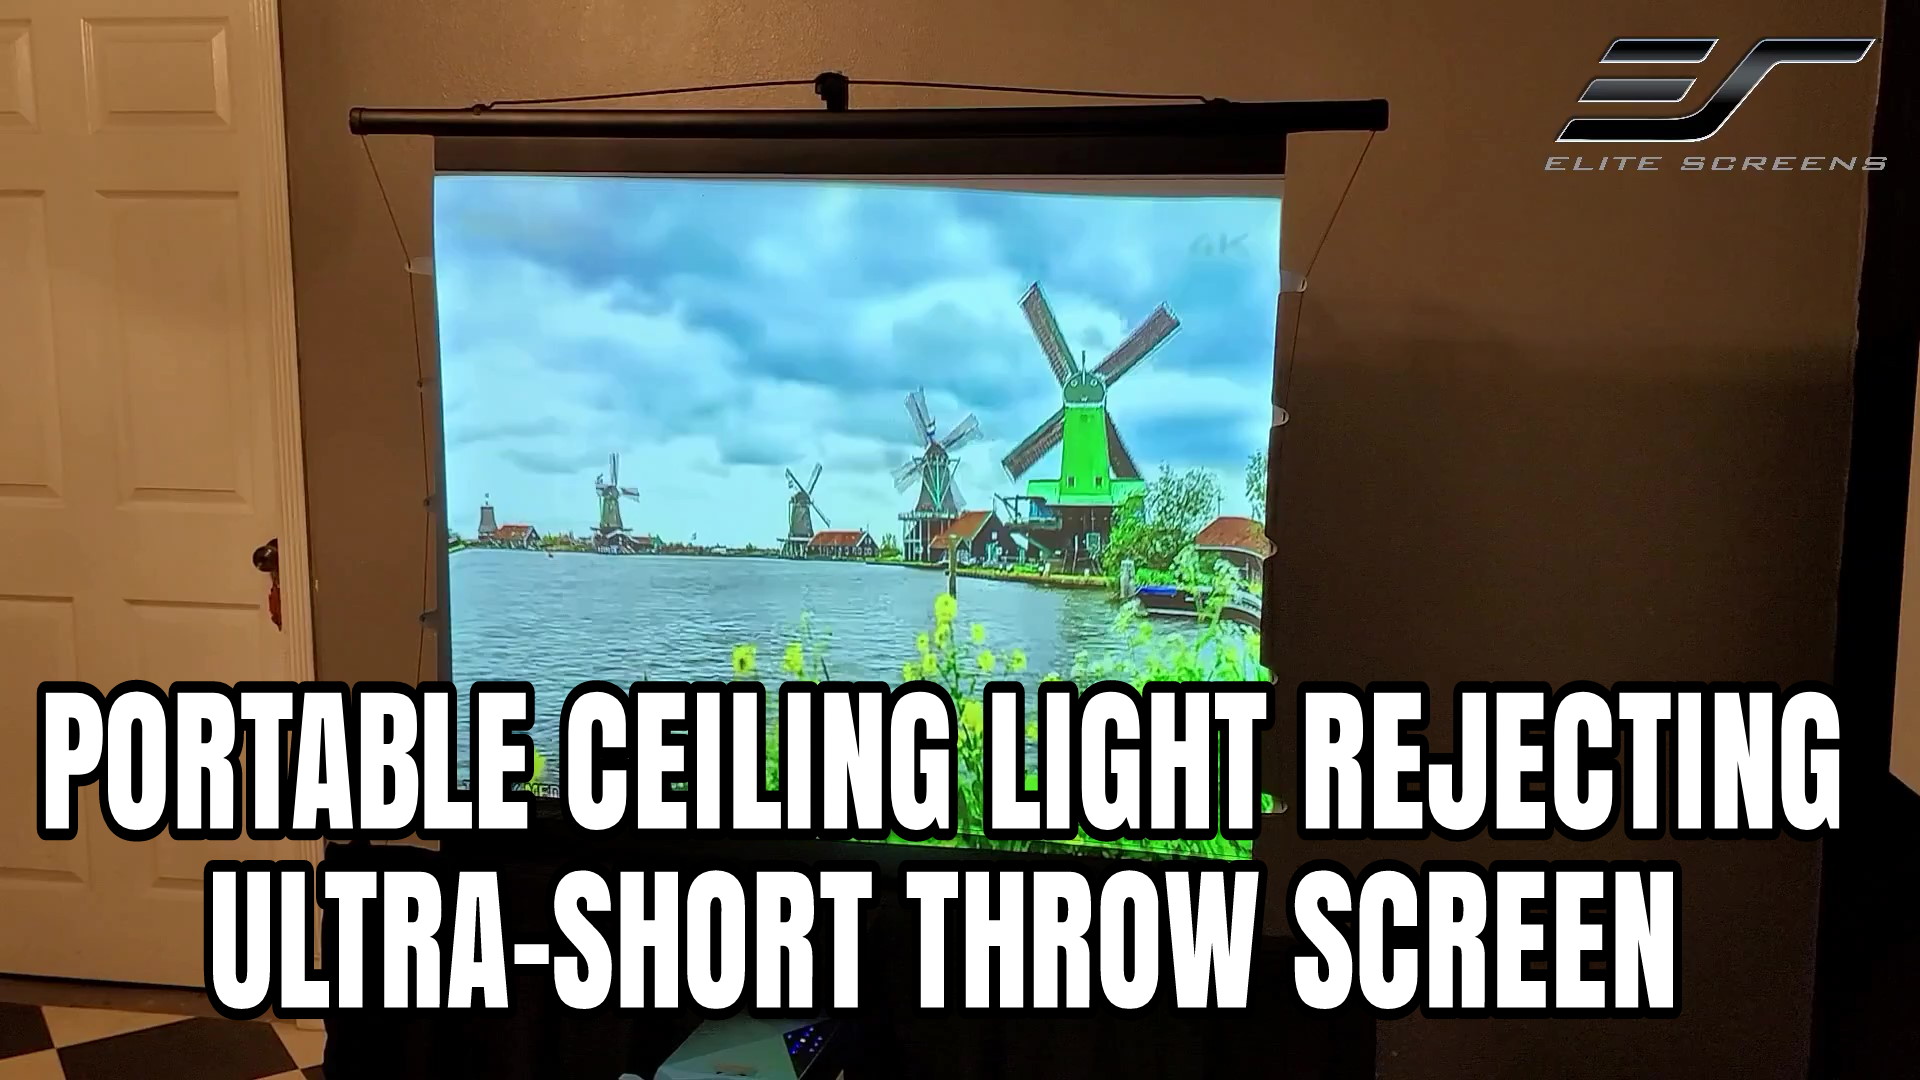 Elite Screens Light On CLR® 3 Portable Ceiling Light Rejecting Screen Reviewed by Joelster